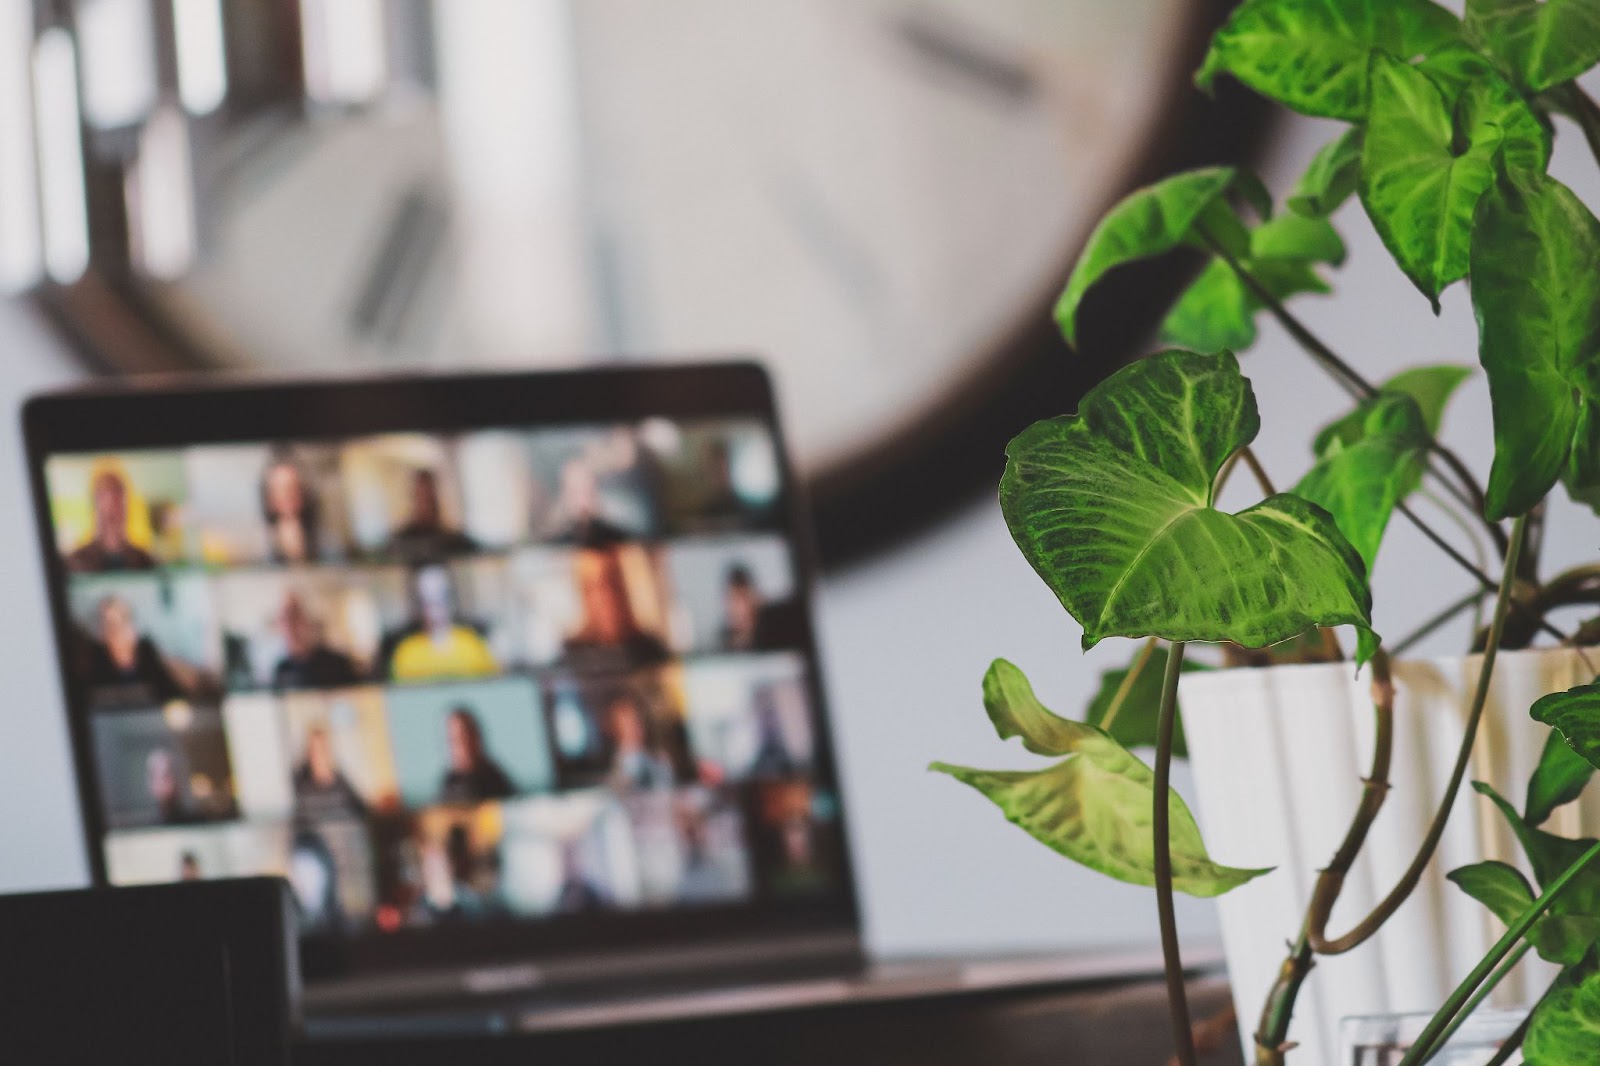 12 Virtual Team Building Ideas That Will Engage and Strengthen Your Remote Team